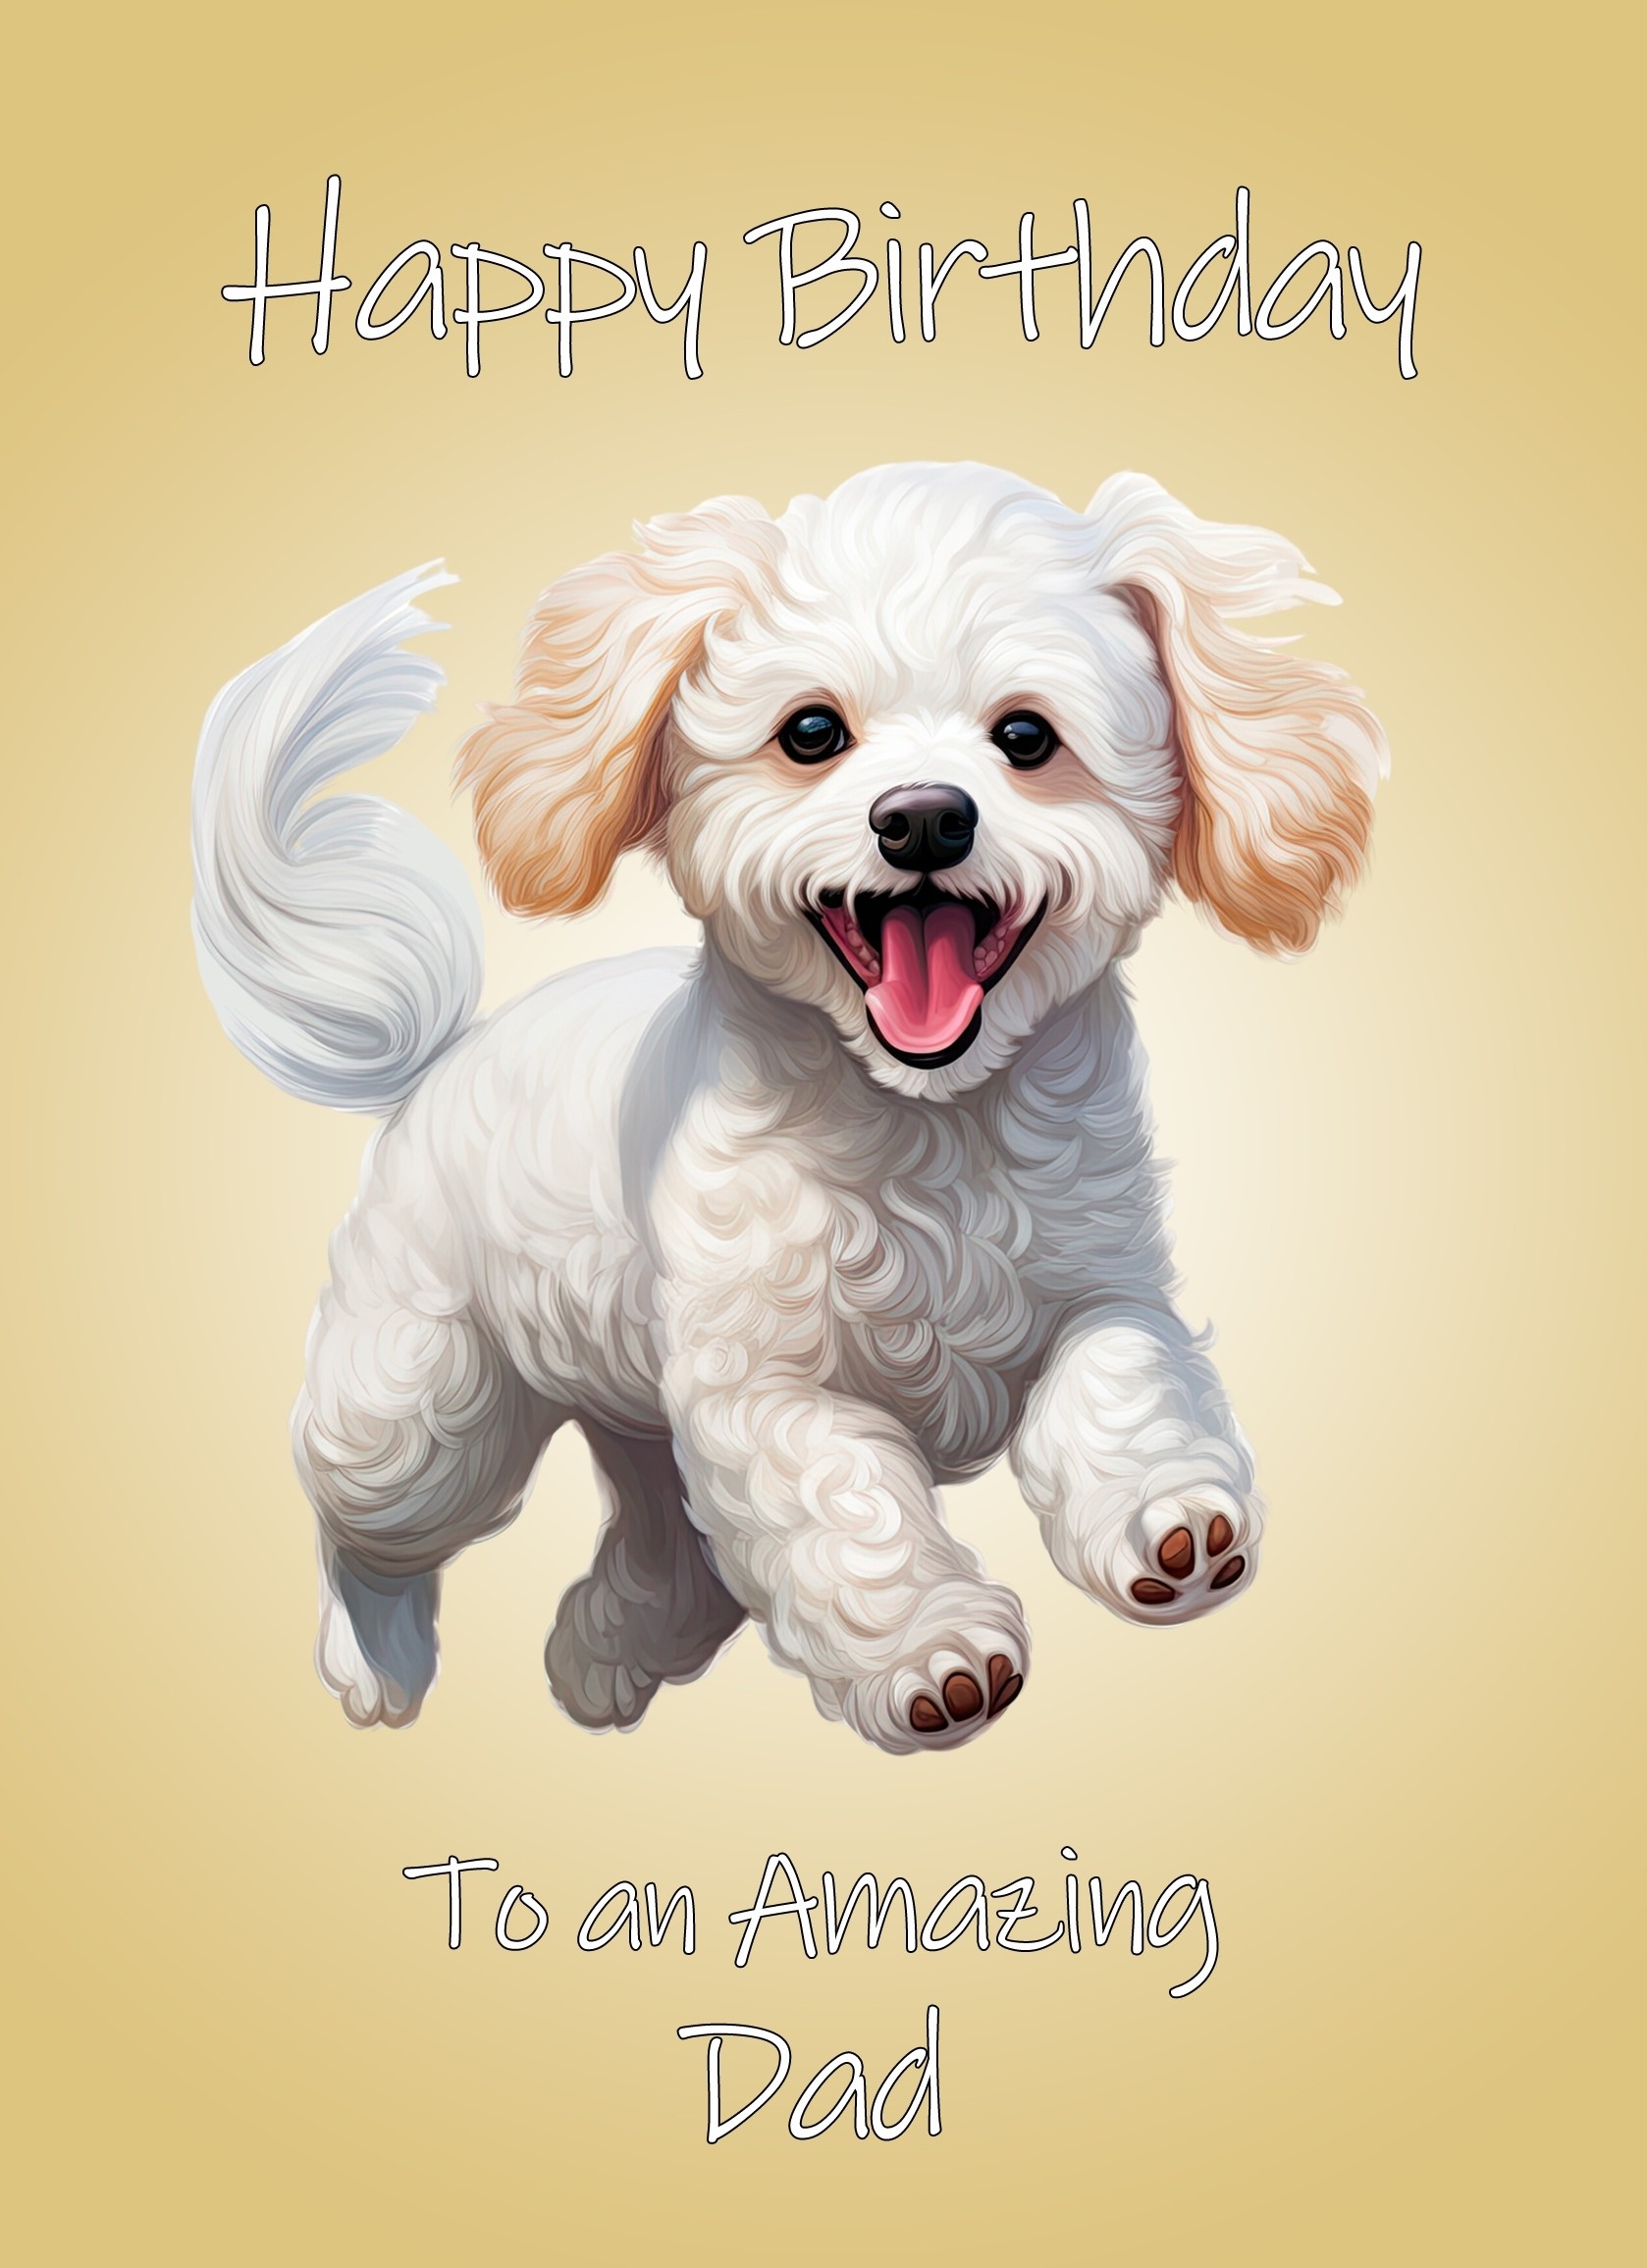 Poodle Dog Birthday Card For Dad